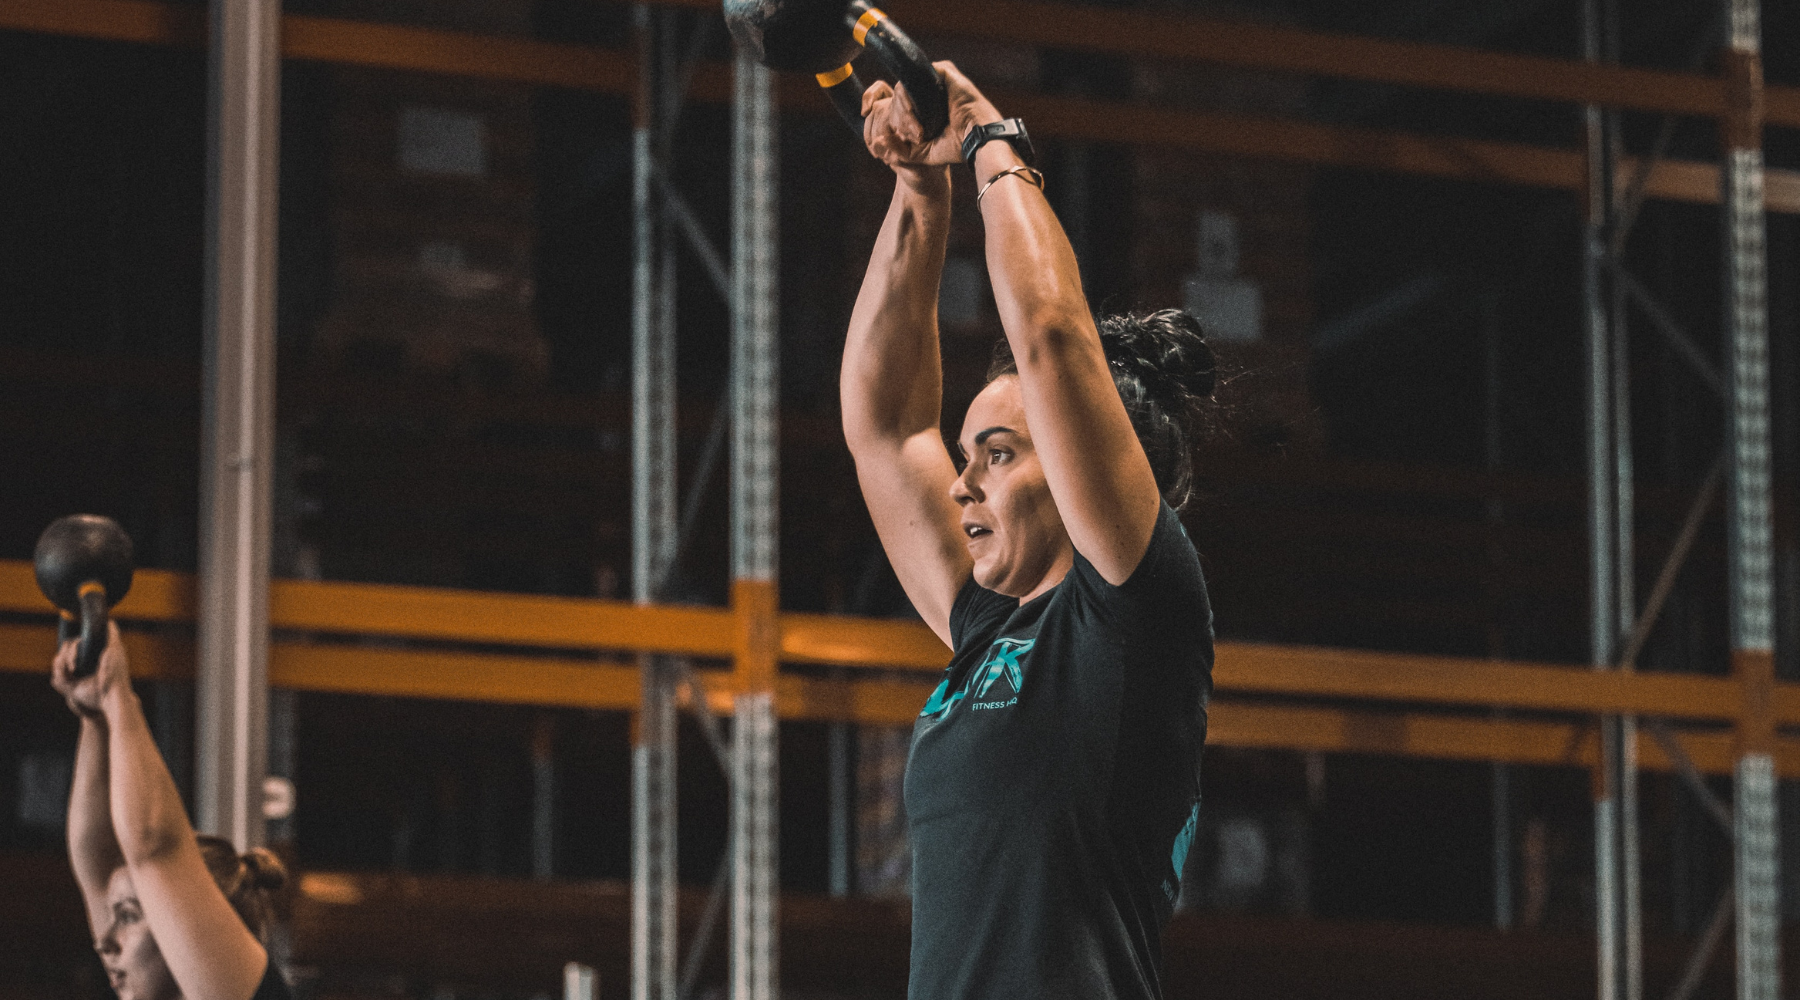 Army Capt. Dan Whitten CrossFit Hero Daniel WOD Workout - V3 Apparel womens activewear, gym clothing and fitness athleisure